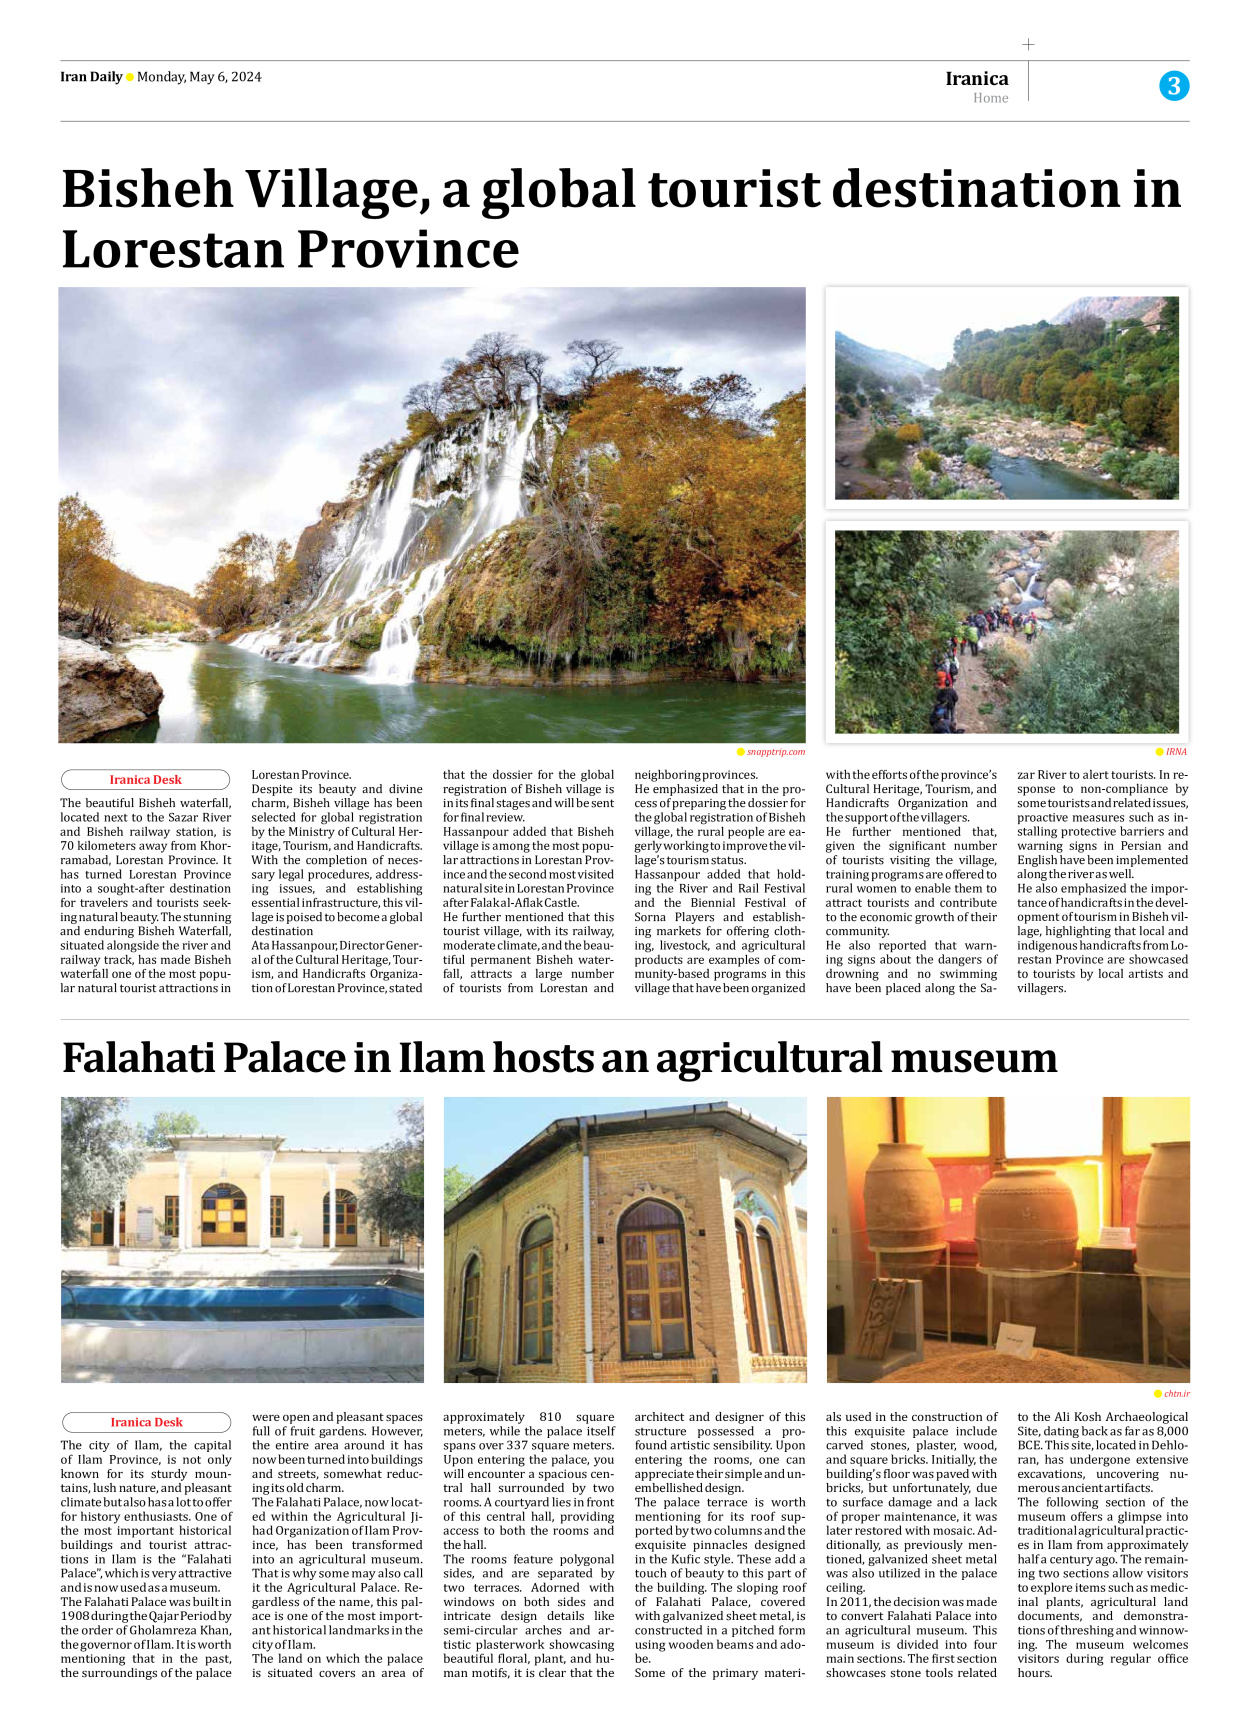 Iran Daily - Number Seven Thousand Five Hundred and Fifty - 06 May 2024 - Page 3